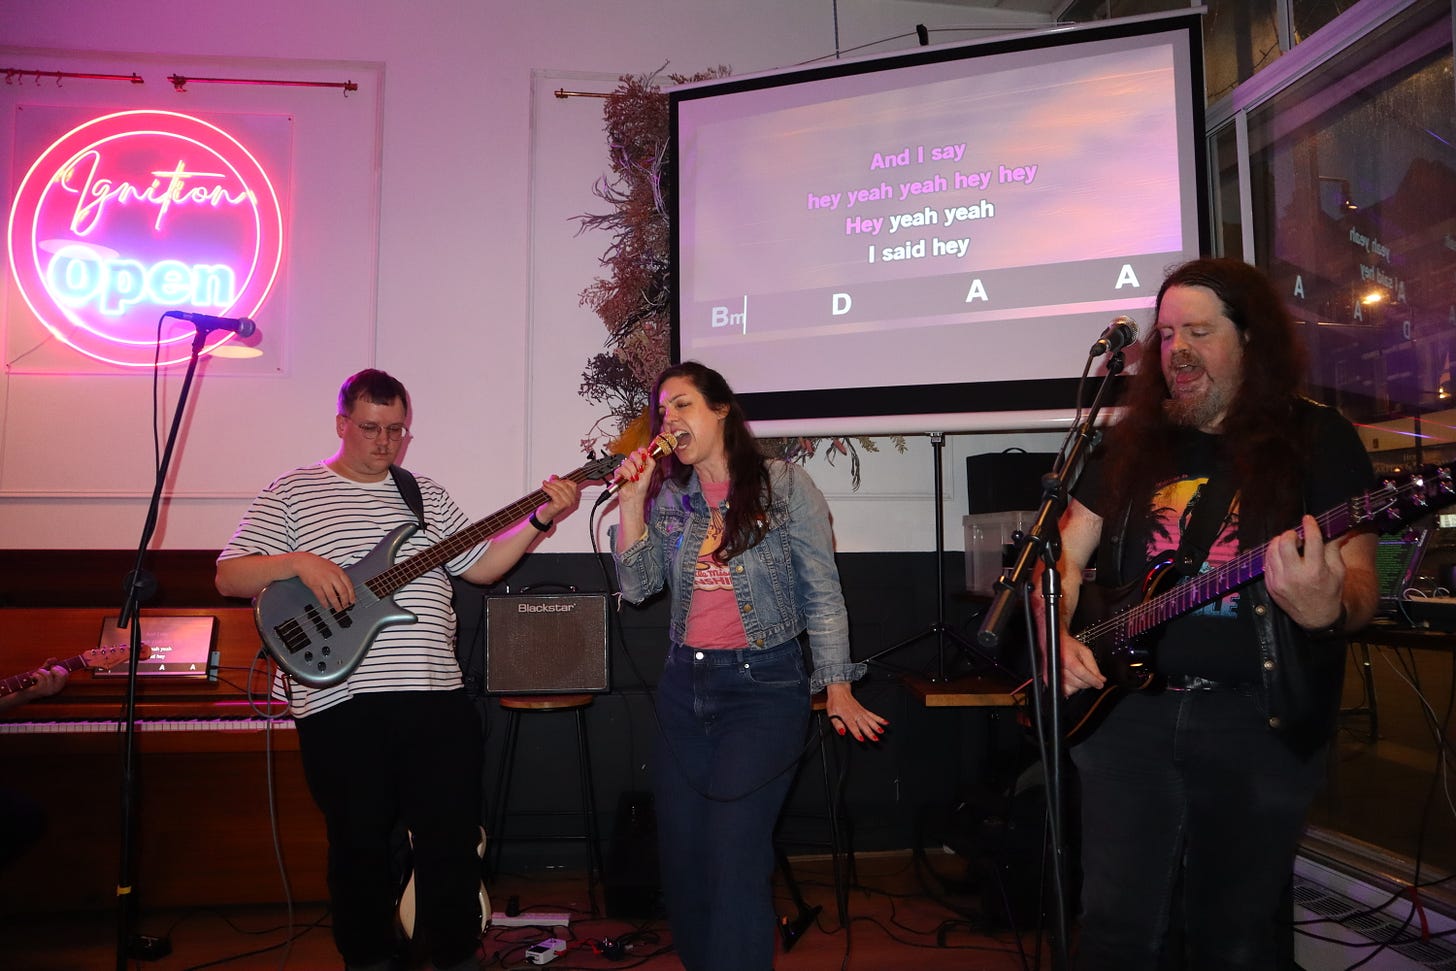 A neon sign reads "Ignition Open"; three musicians are playing and singing underneath a projector screen showing the song lyrics and chords. Everybody is very sweaty and there's cables and guitars everywhere. It looks like fun.